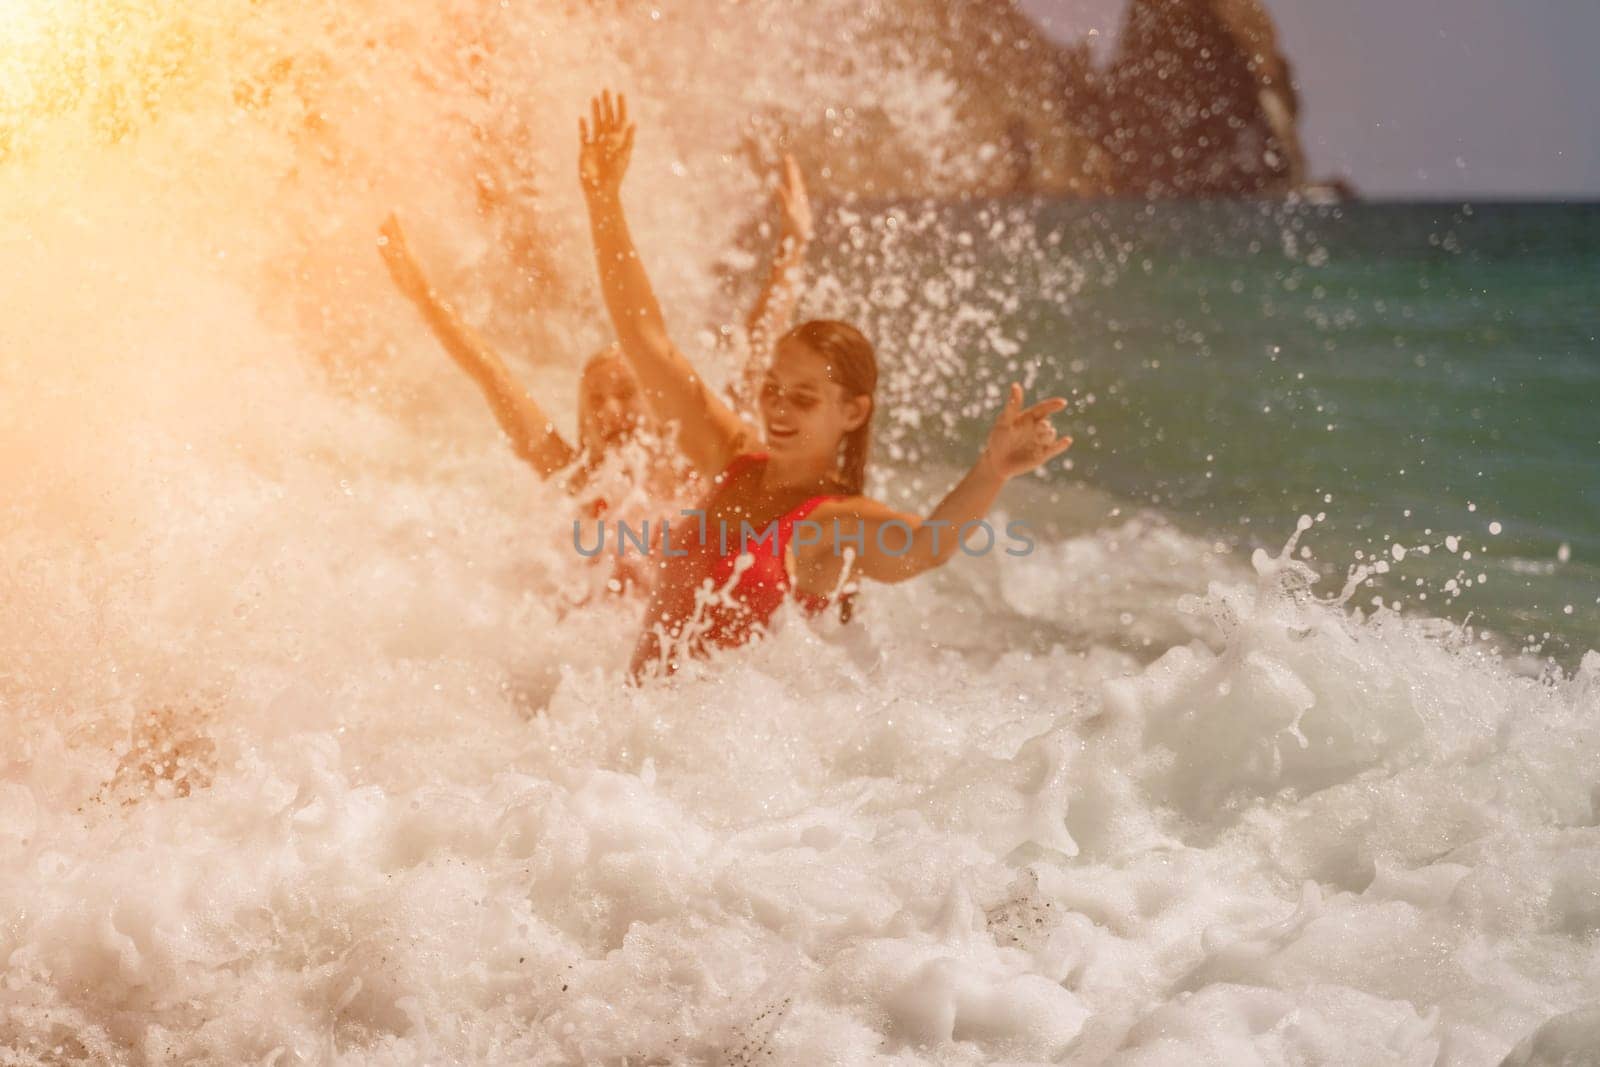 Women ocean play. Seaside, beach daytime, enjoying beach fun. Two women in red swimsuits enjoying themselves in the ocean waves and raising their hands up